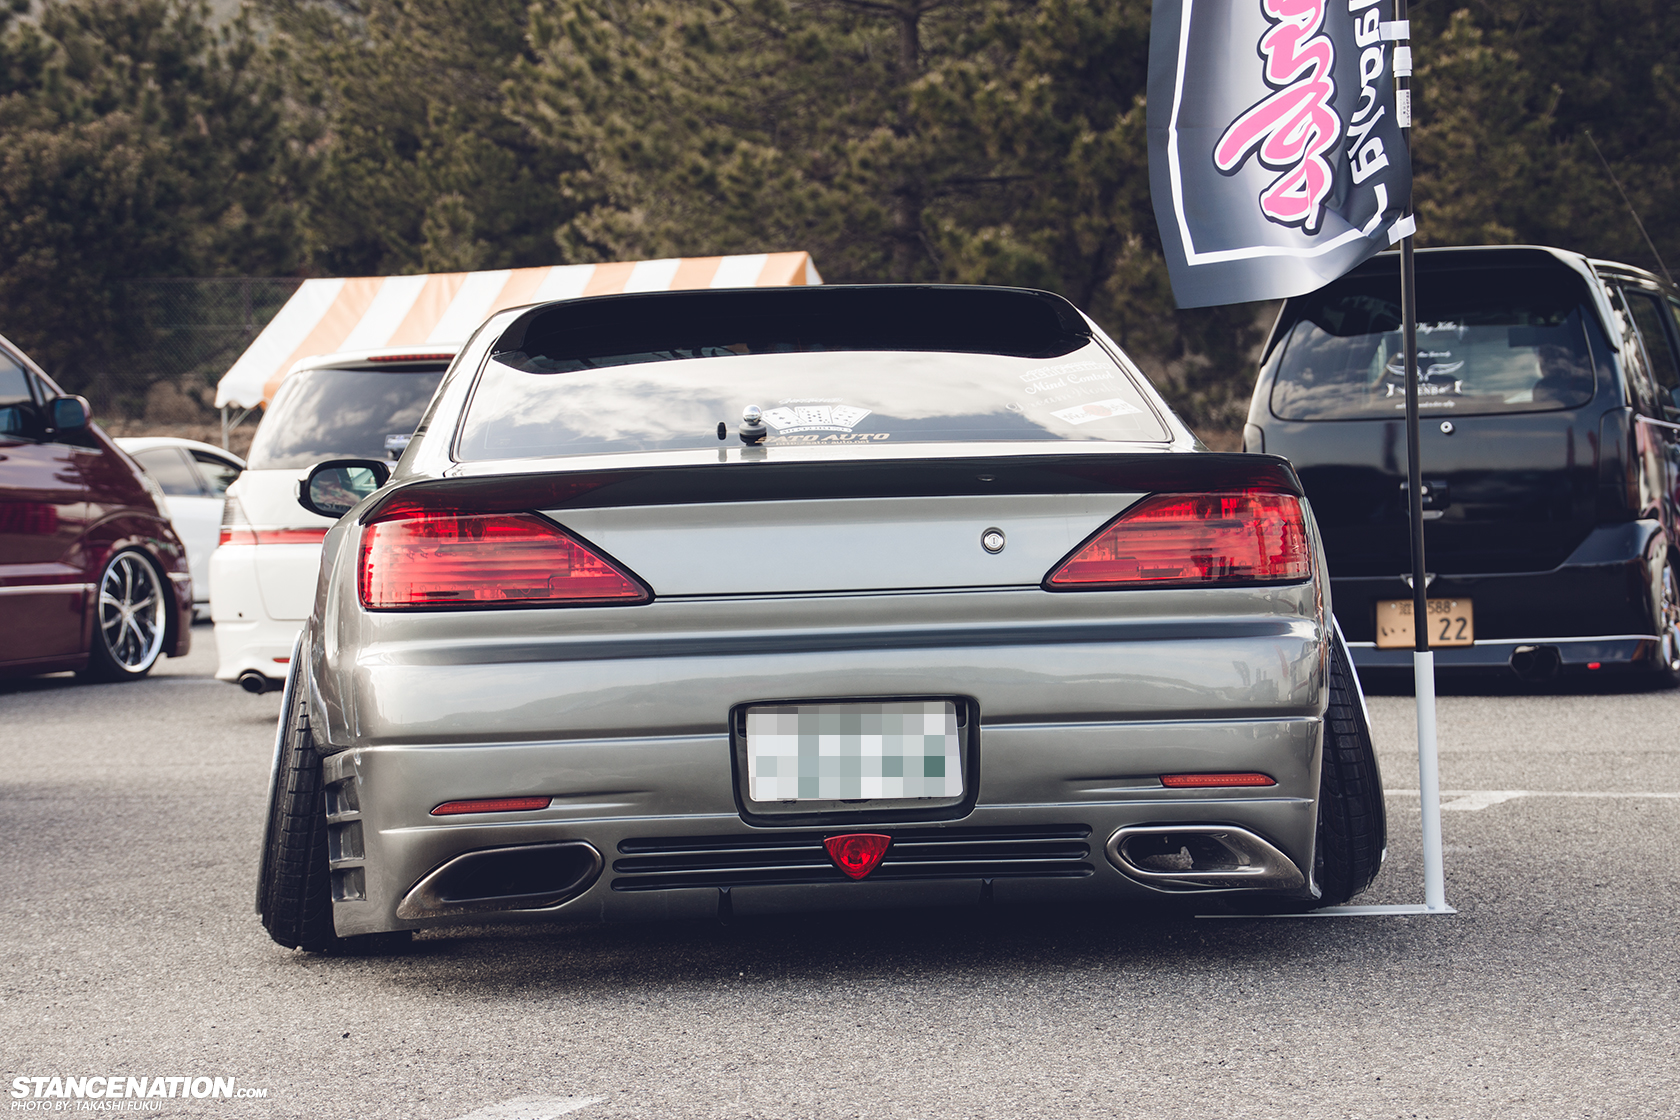 15 s com. Nissan s15 stance. Nissan Silvia s15 taillights. Silvia s15 задние фары.